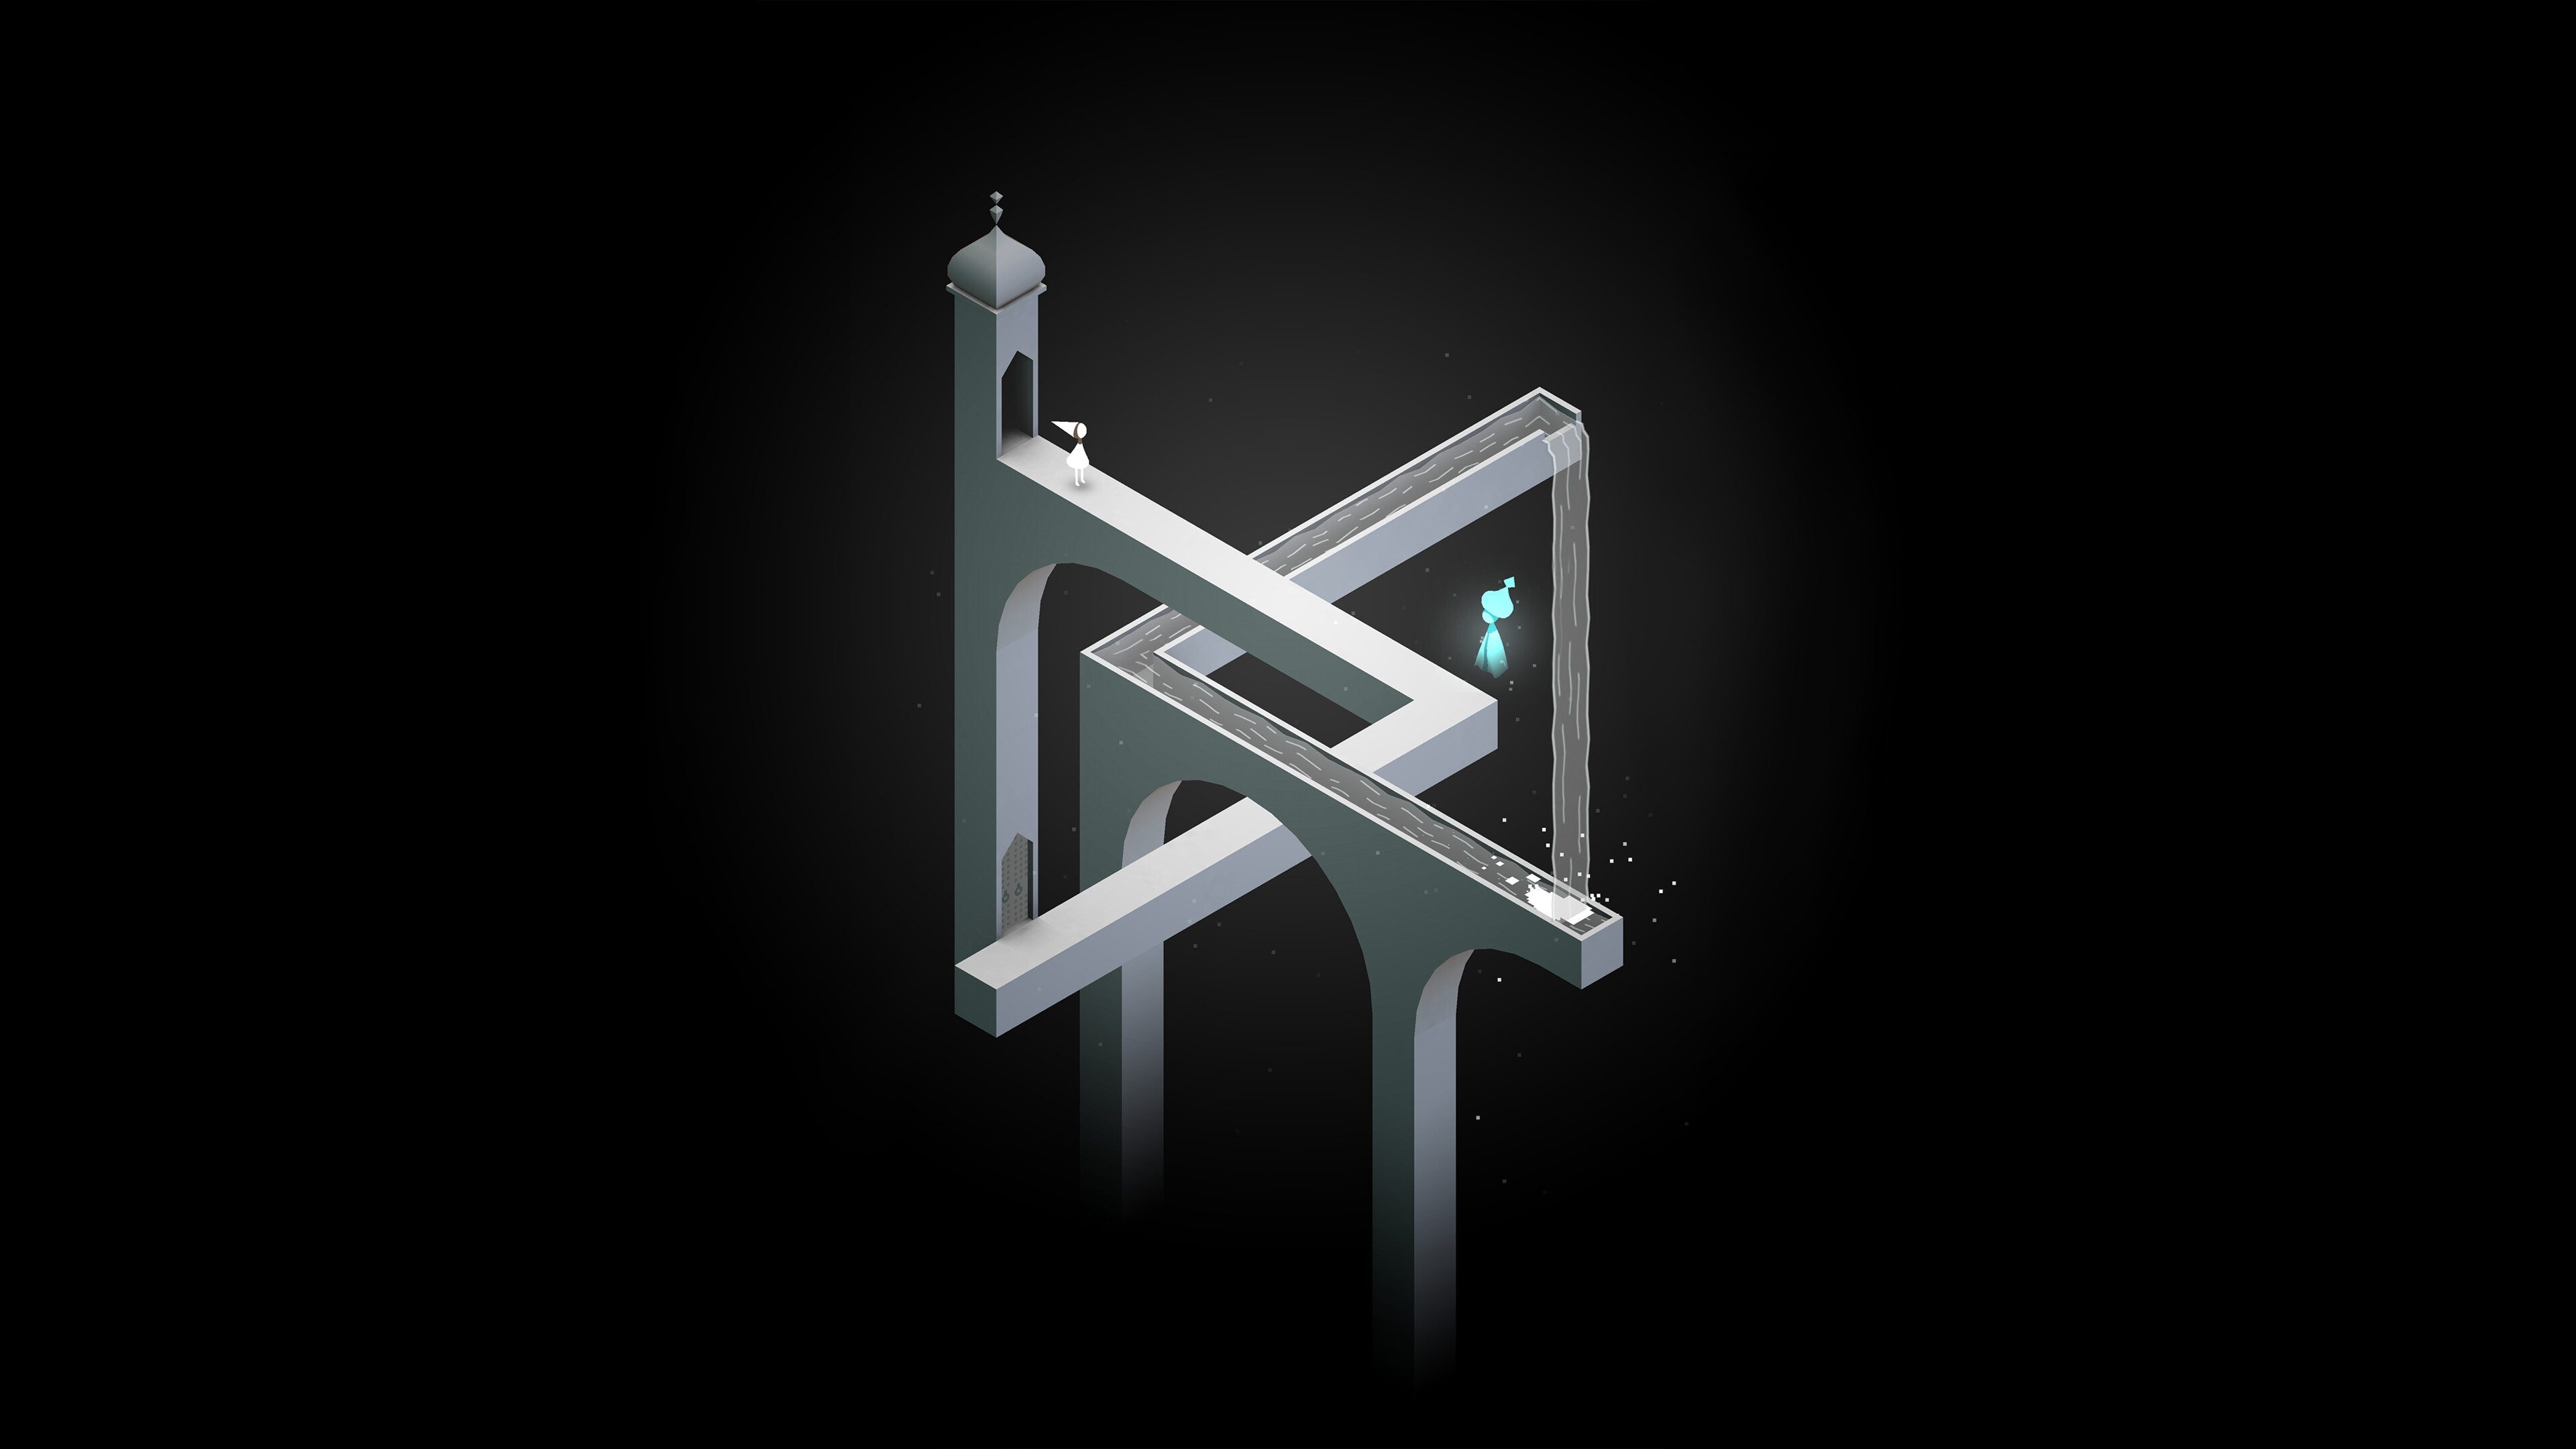 Monument Valley: The player leads princess Ida through mazes of optical illusions and impossible objects while manipulating the world around her to reach various platforms, Video game. 3840x2160 4K Wallpaper.